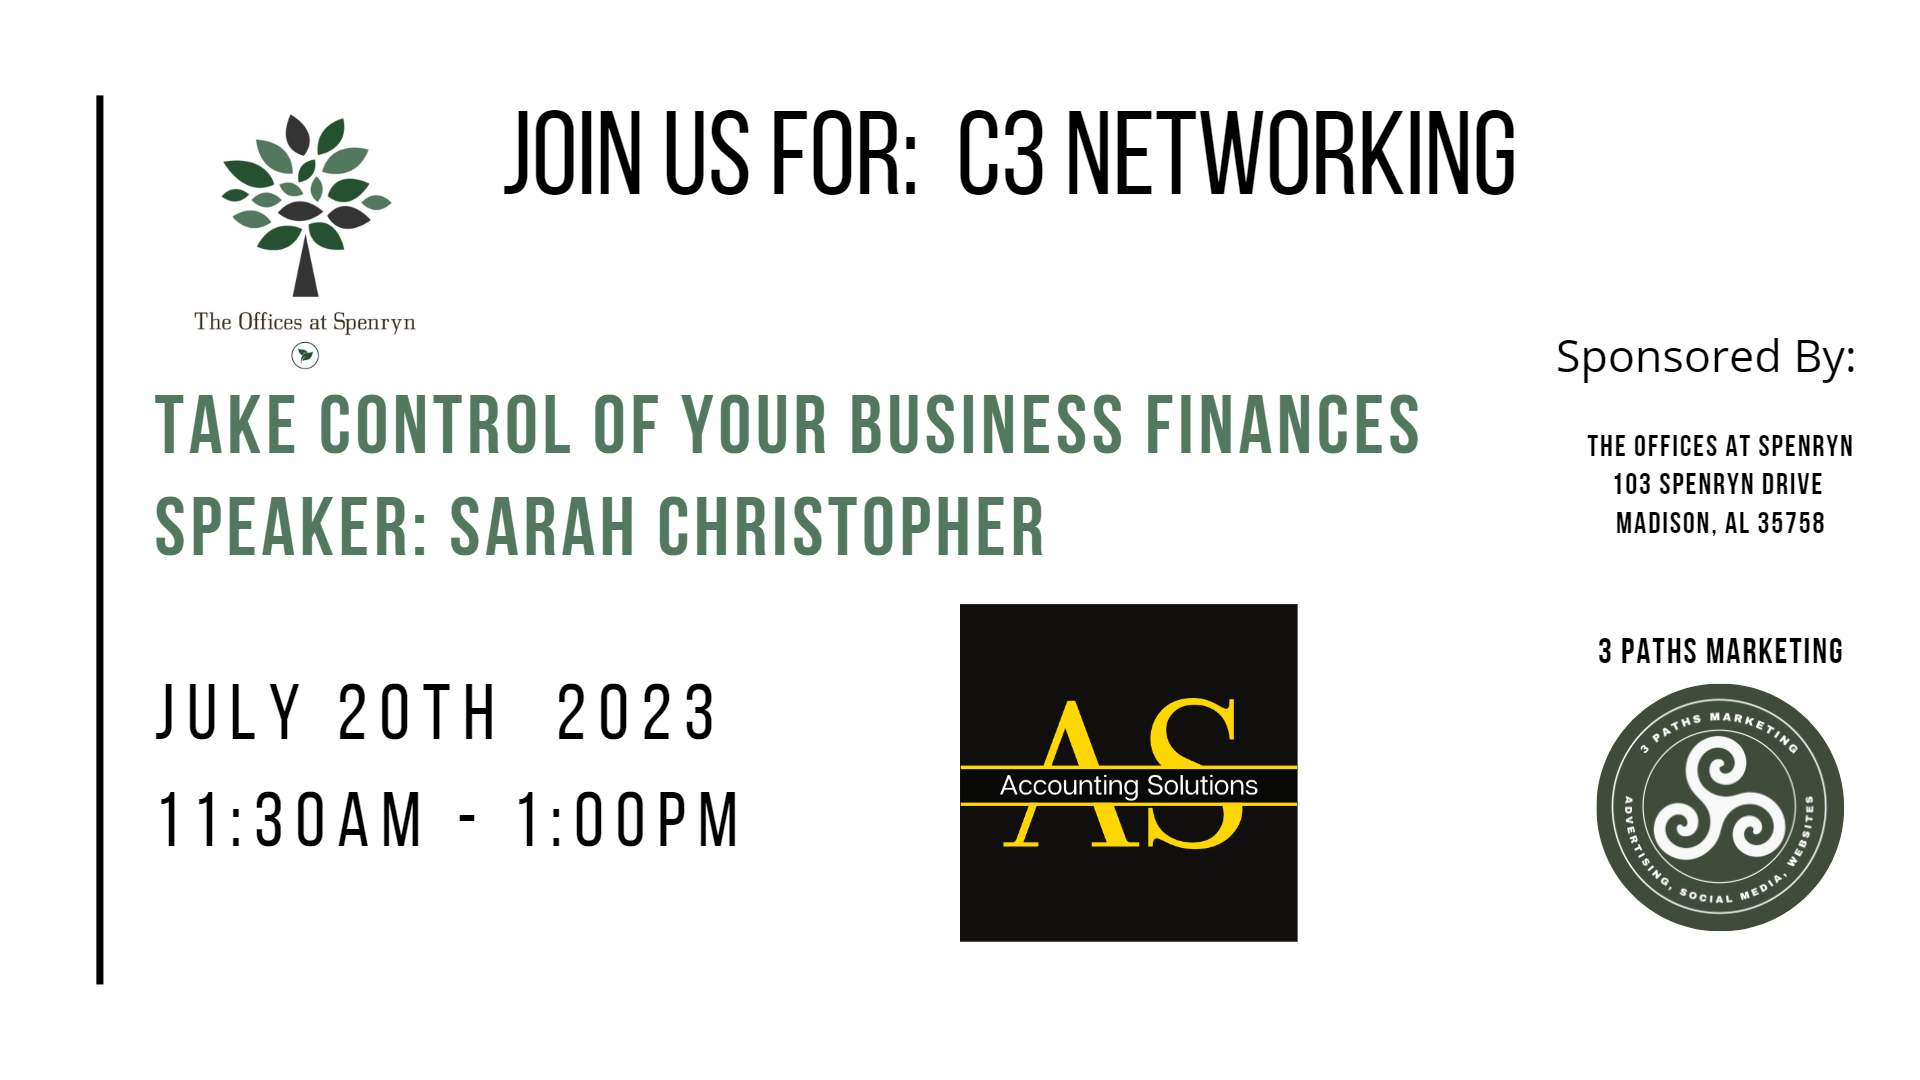 C3 networking banner featuring Accounting solutions logo